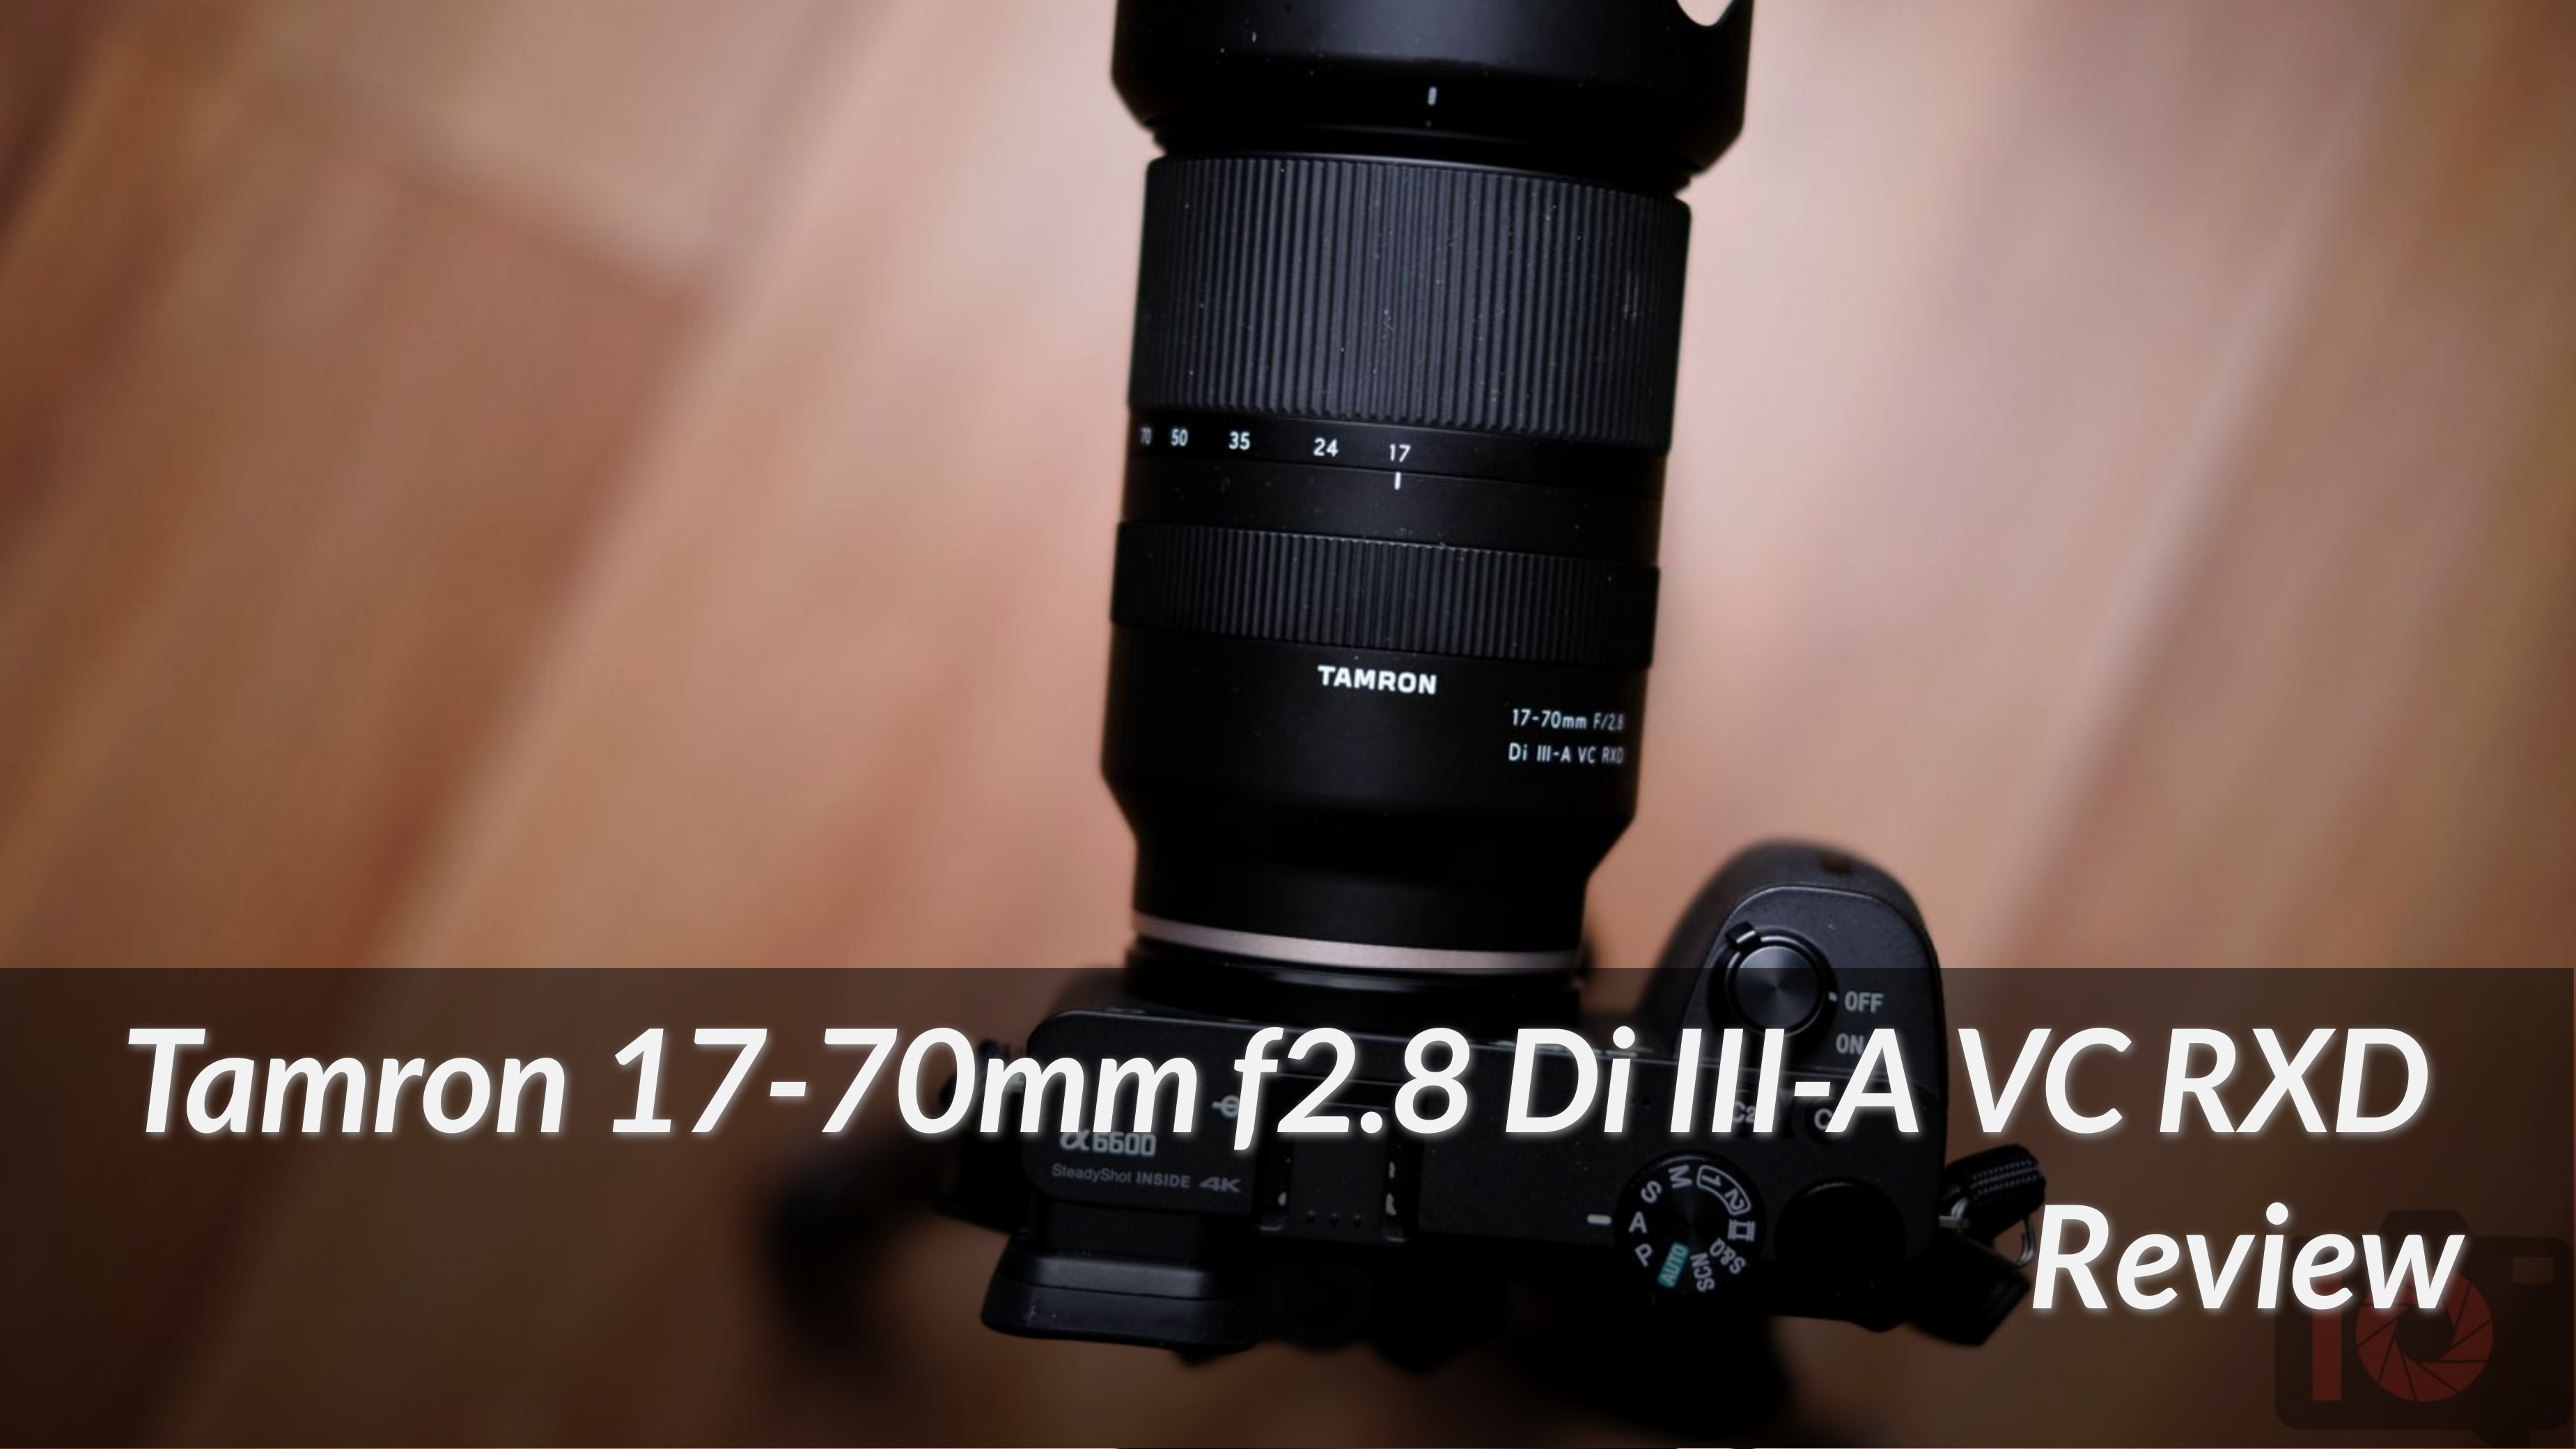 Tamron-17-70mm-f2.8-Di-III-A-VC-RXD-Review-2